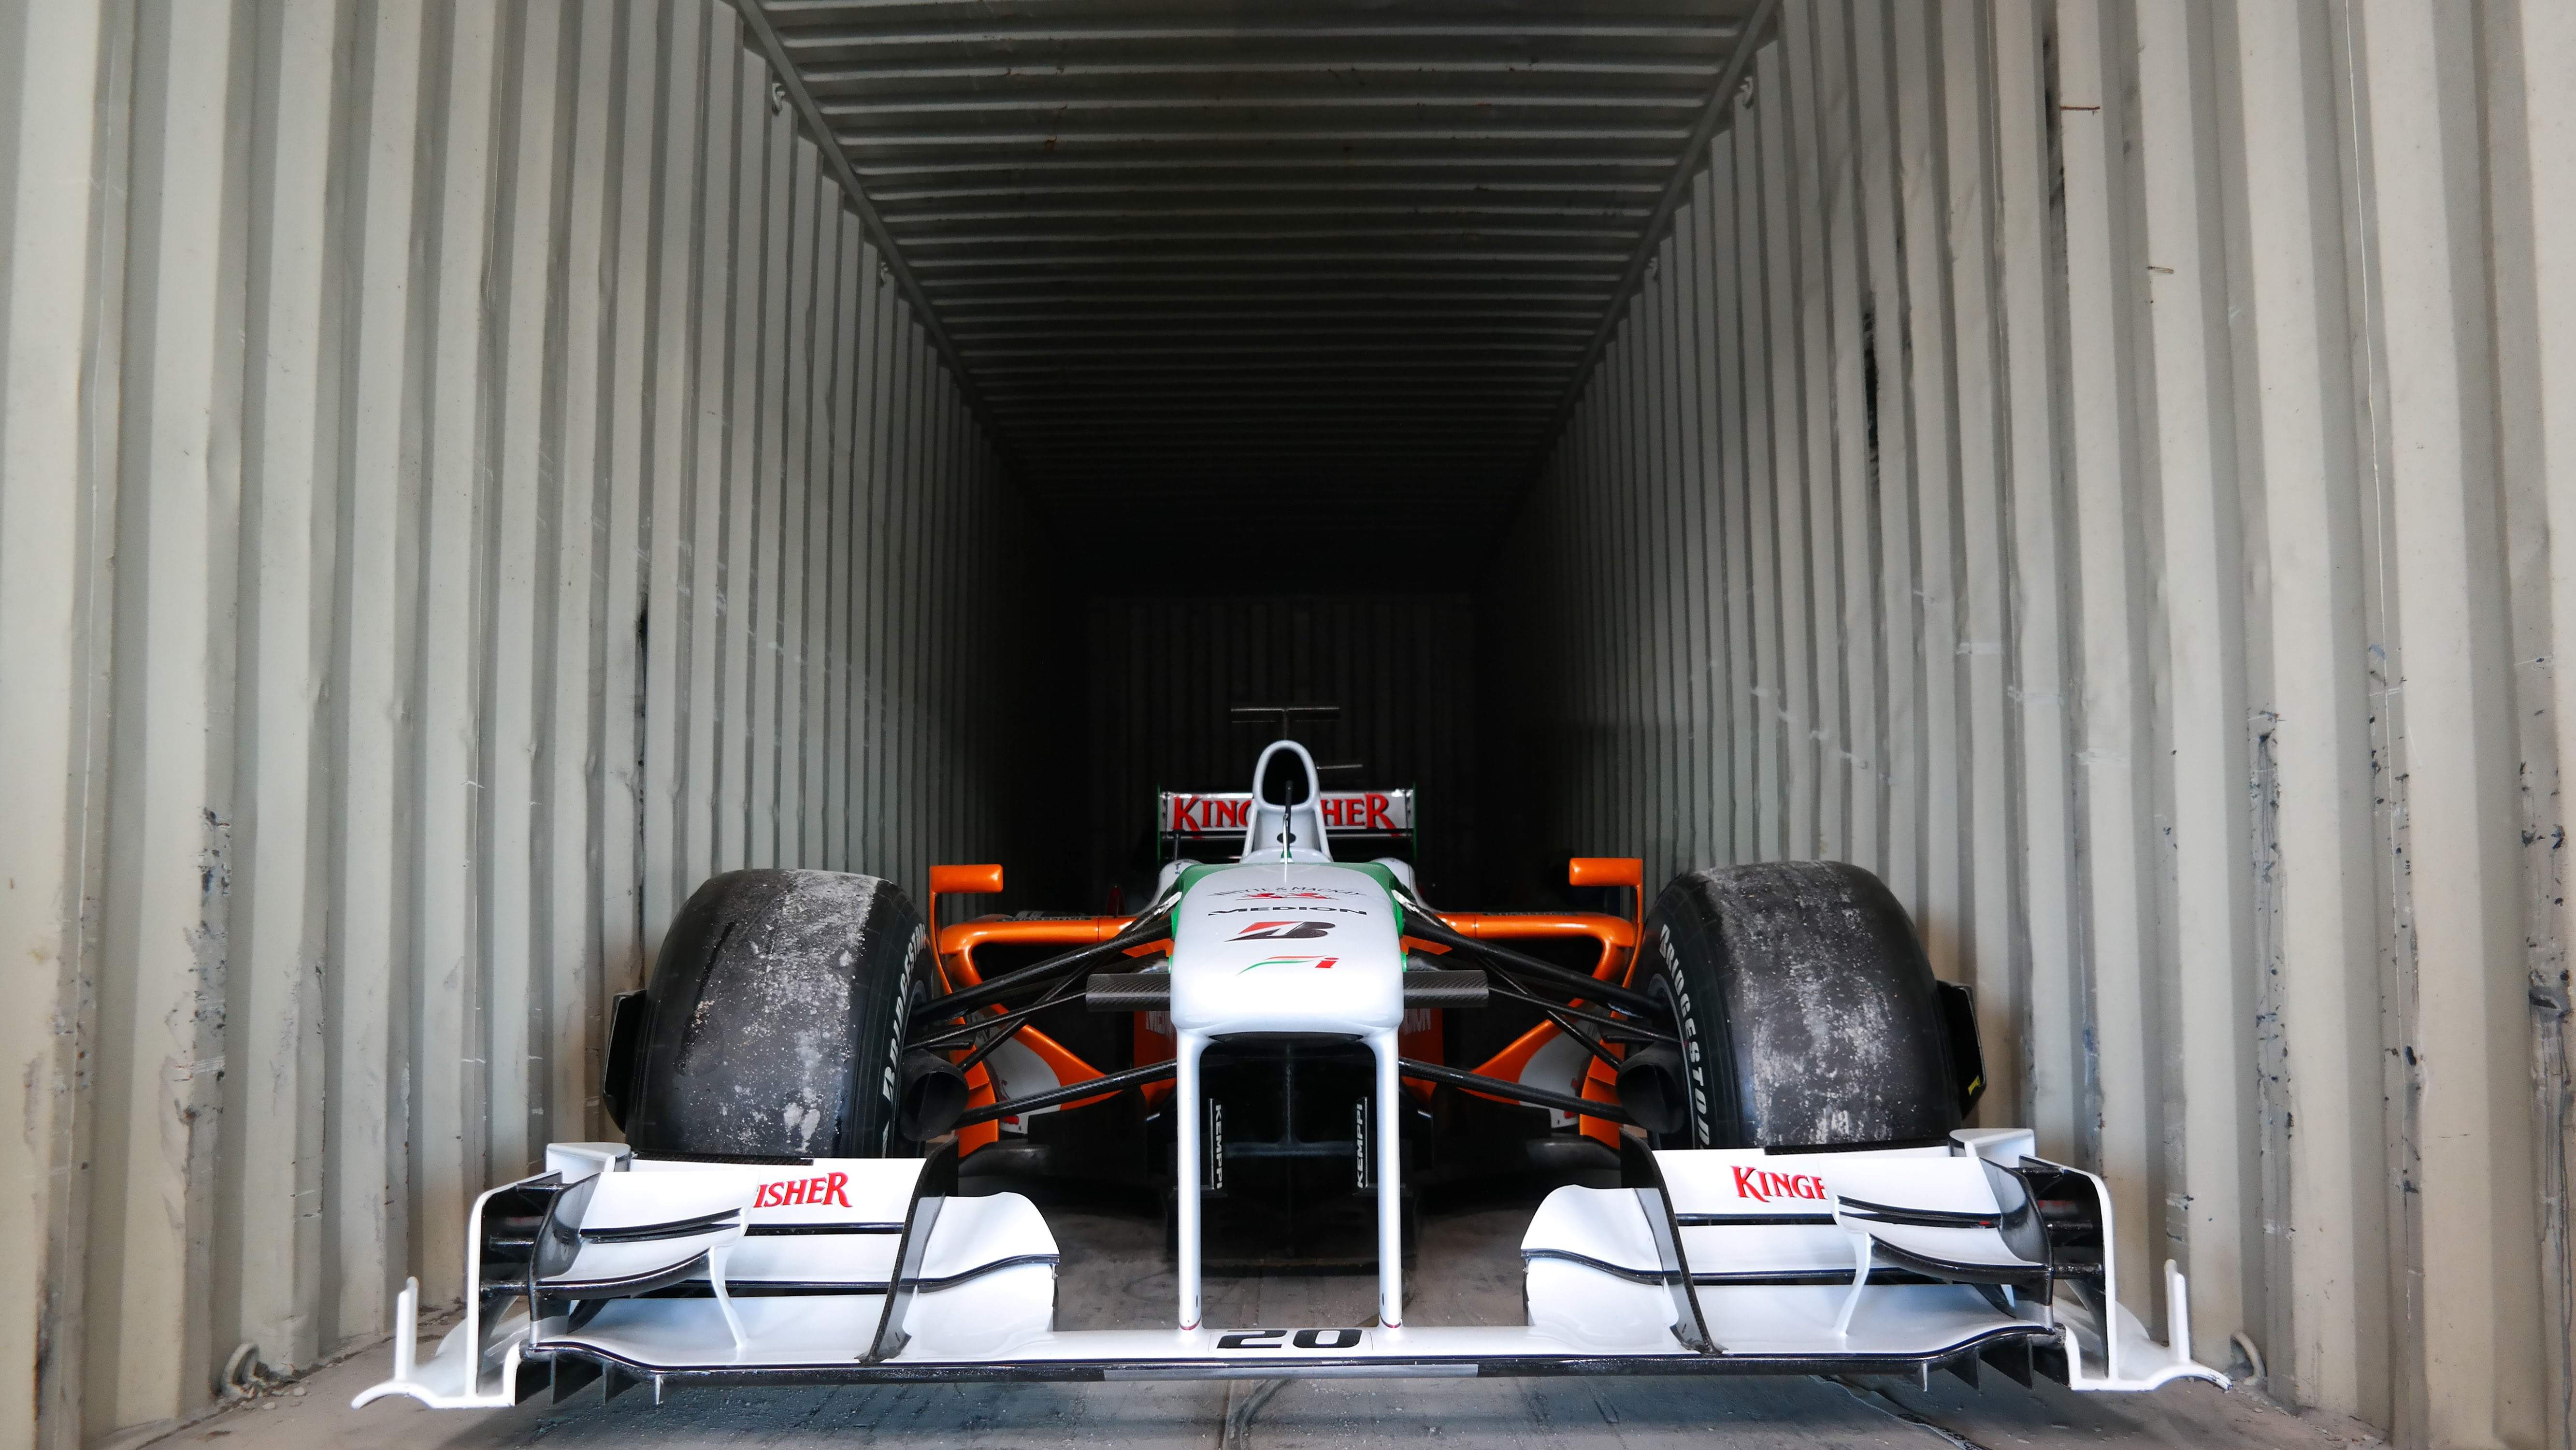 Shipping a Force India F1 car overseas